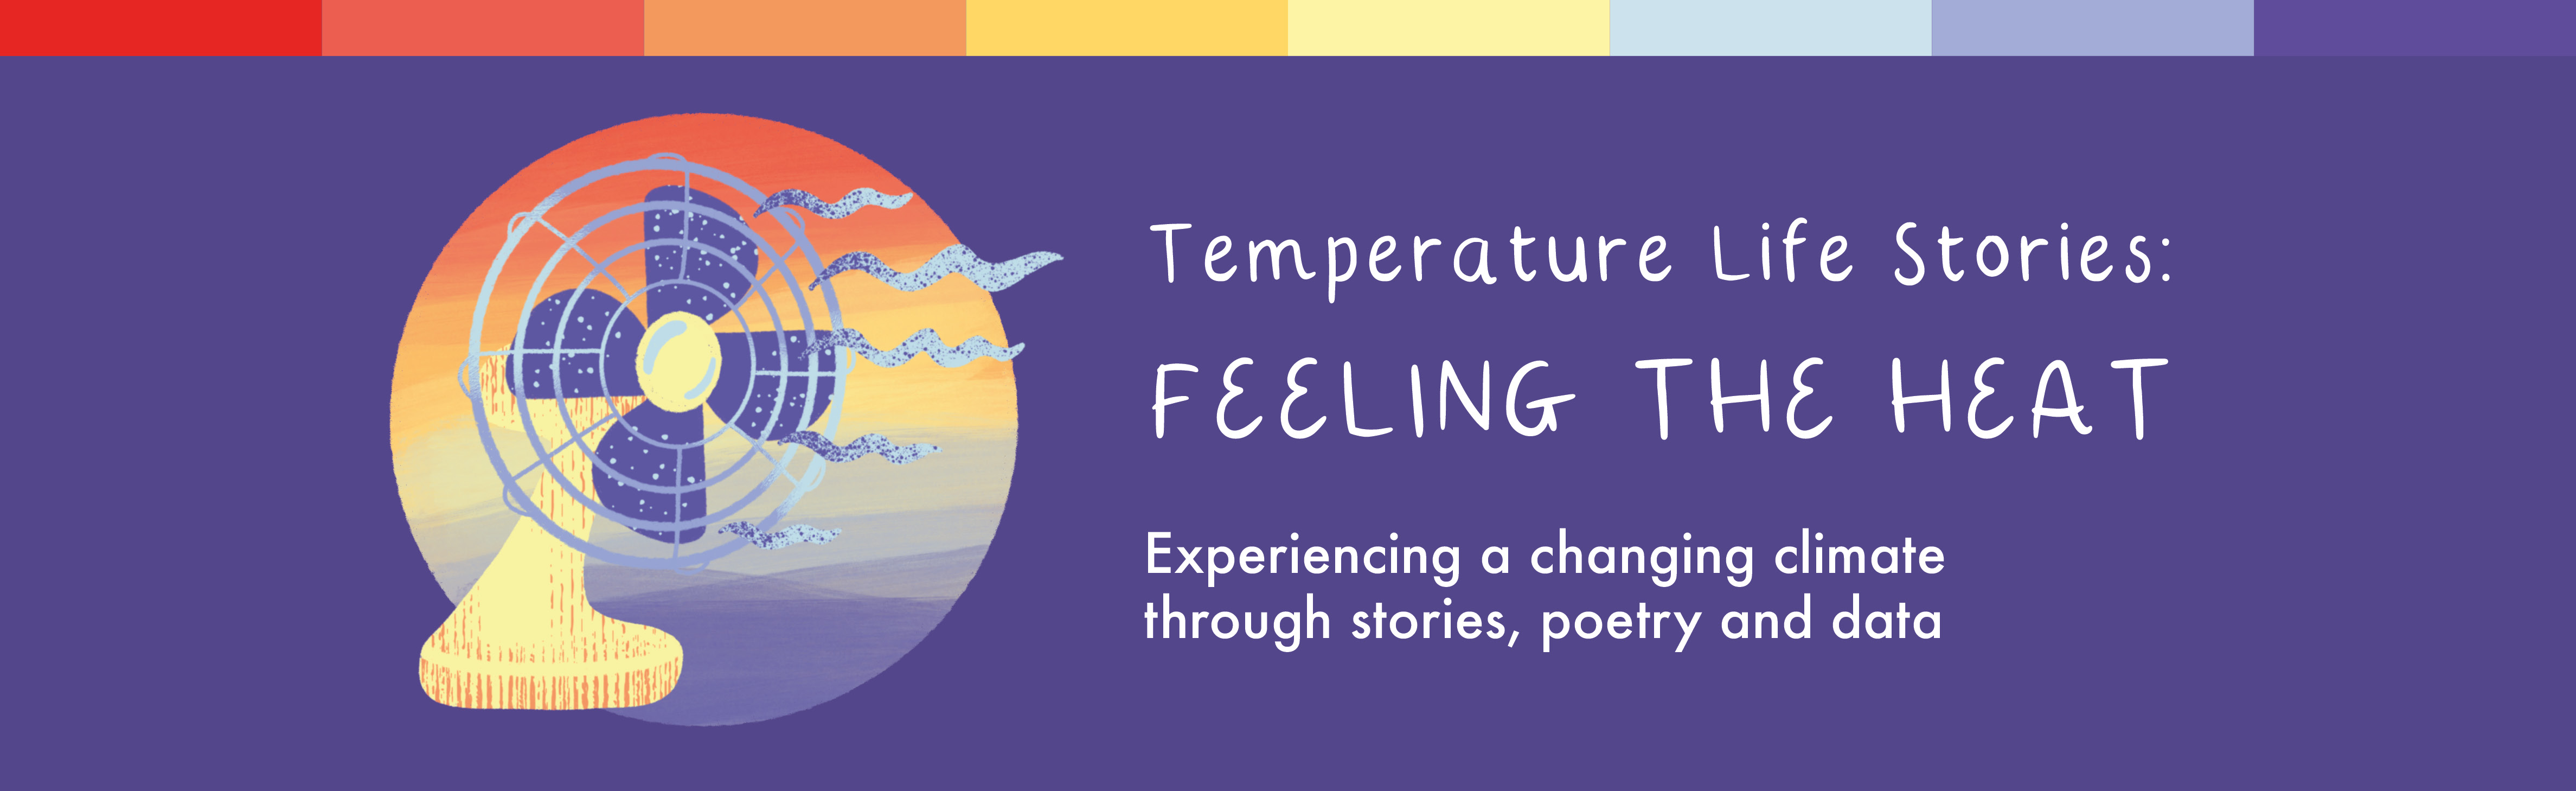 Logo for Temperature Life Stories with illustrated image of a fan on the left